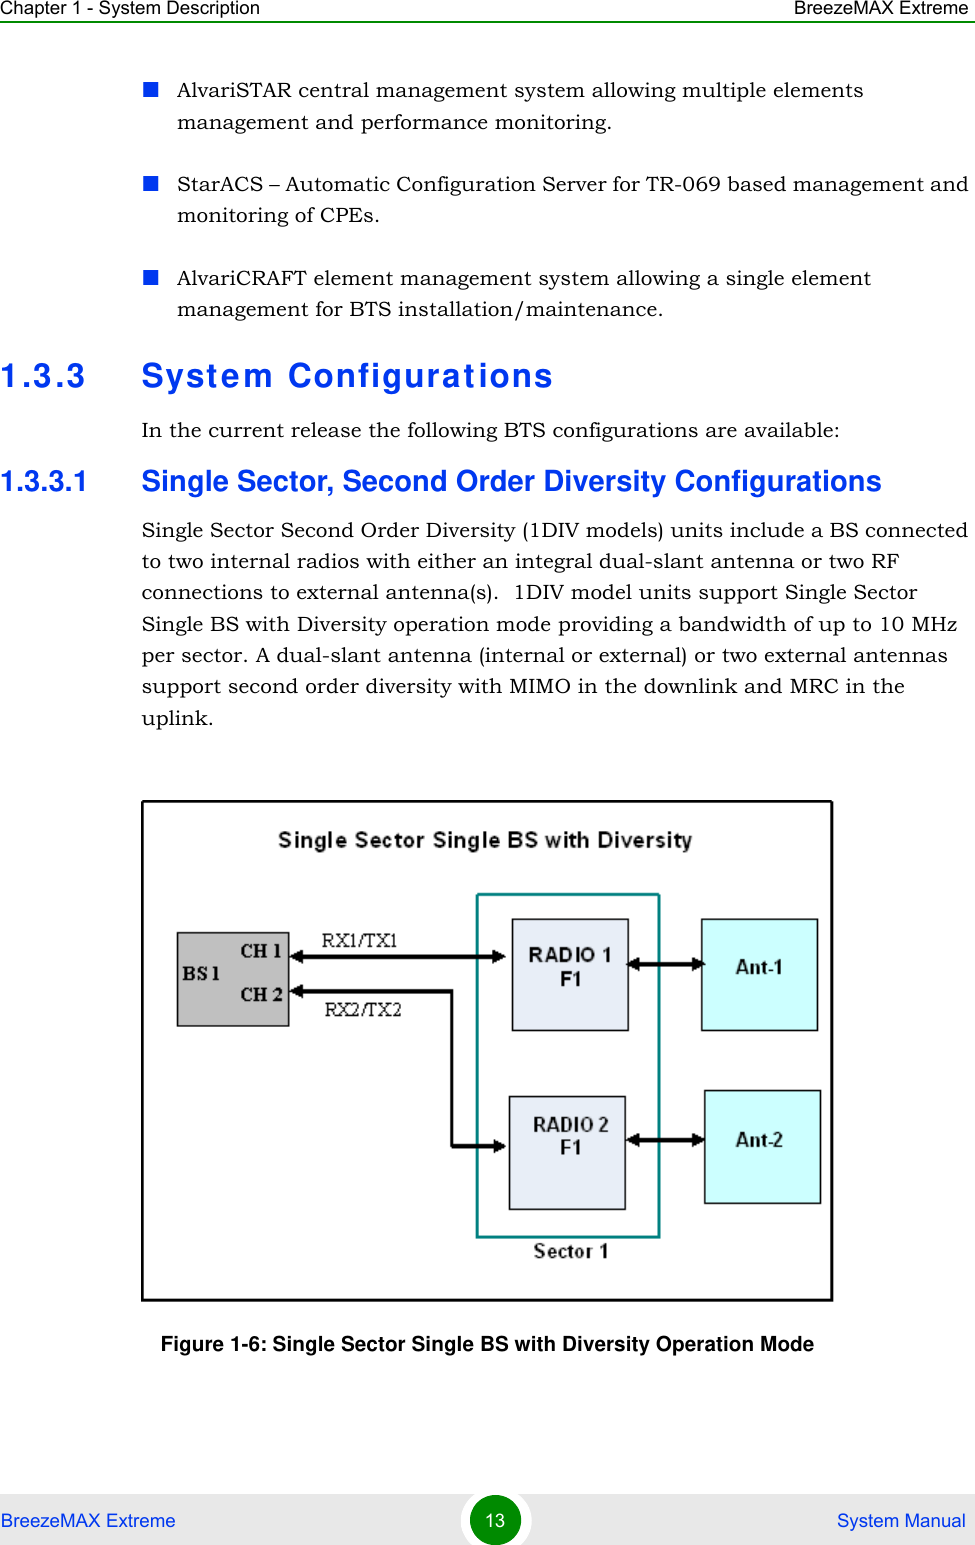 Chapter 1 - System Description BreezeMAX ExtremeBreezeMAX Extreme 13  System ManualAlvariSTAR central management system allowing multiple elements management and performance monitoring.StarACS – Automatic Configuration Server for TR-069 based management and monitoring of CPEs. AlvariCRAFT element management system allowing a single element management for BTS installation/maintenance.1.3.3 System ConfigurationsIn the current release the following BTS configurations are available:1.3.3.1 Single Sector, Second Order Diversity ConfigurationsSingle Sector Second Order Diversity (1DIV models) units include a BS connected to two internal radios with either an integral dual-slant antenna or two RF connections to external antenna(s).  1DIV model units support Single Sector Single BS with Diversity operation mode providing a bandwidth of up to 10 MHz per sector. A dual-slant antenna (internal or external) or two external antennas support second order diversity with MIMO in the downlink and MRC in the uplink.Figure 1-6: Single Sector Single BS with Diversity Operation Mode